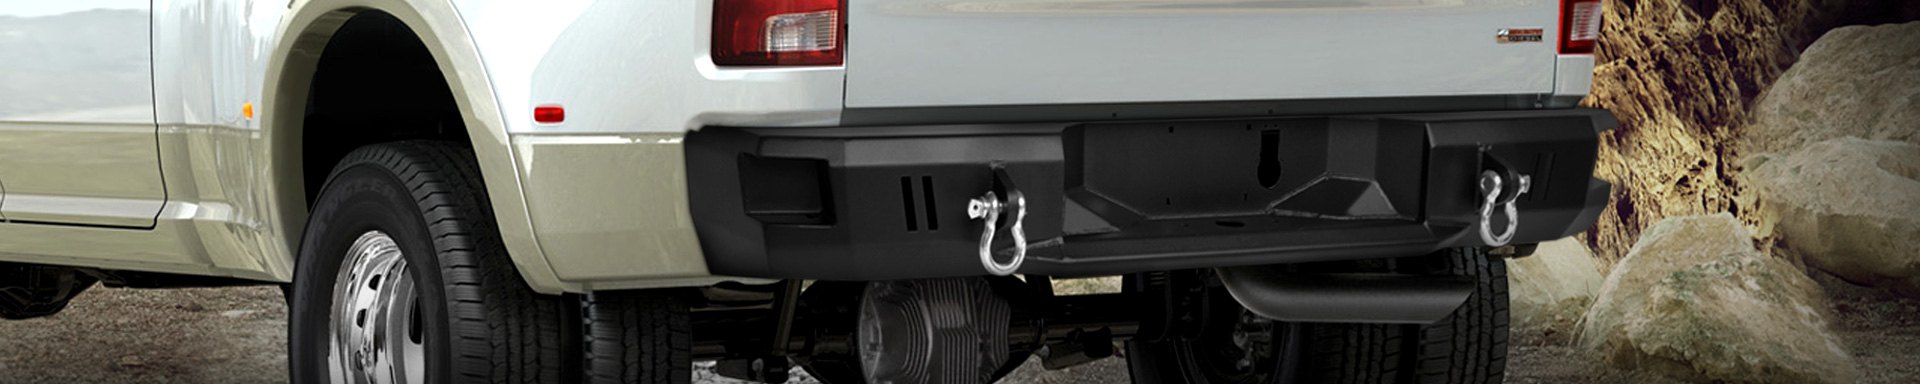 Off-Road Essential: New Full-Width Rear Bumper by TORXE For Dodge Ram 